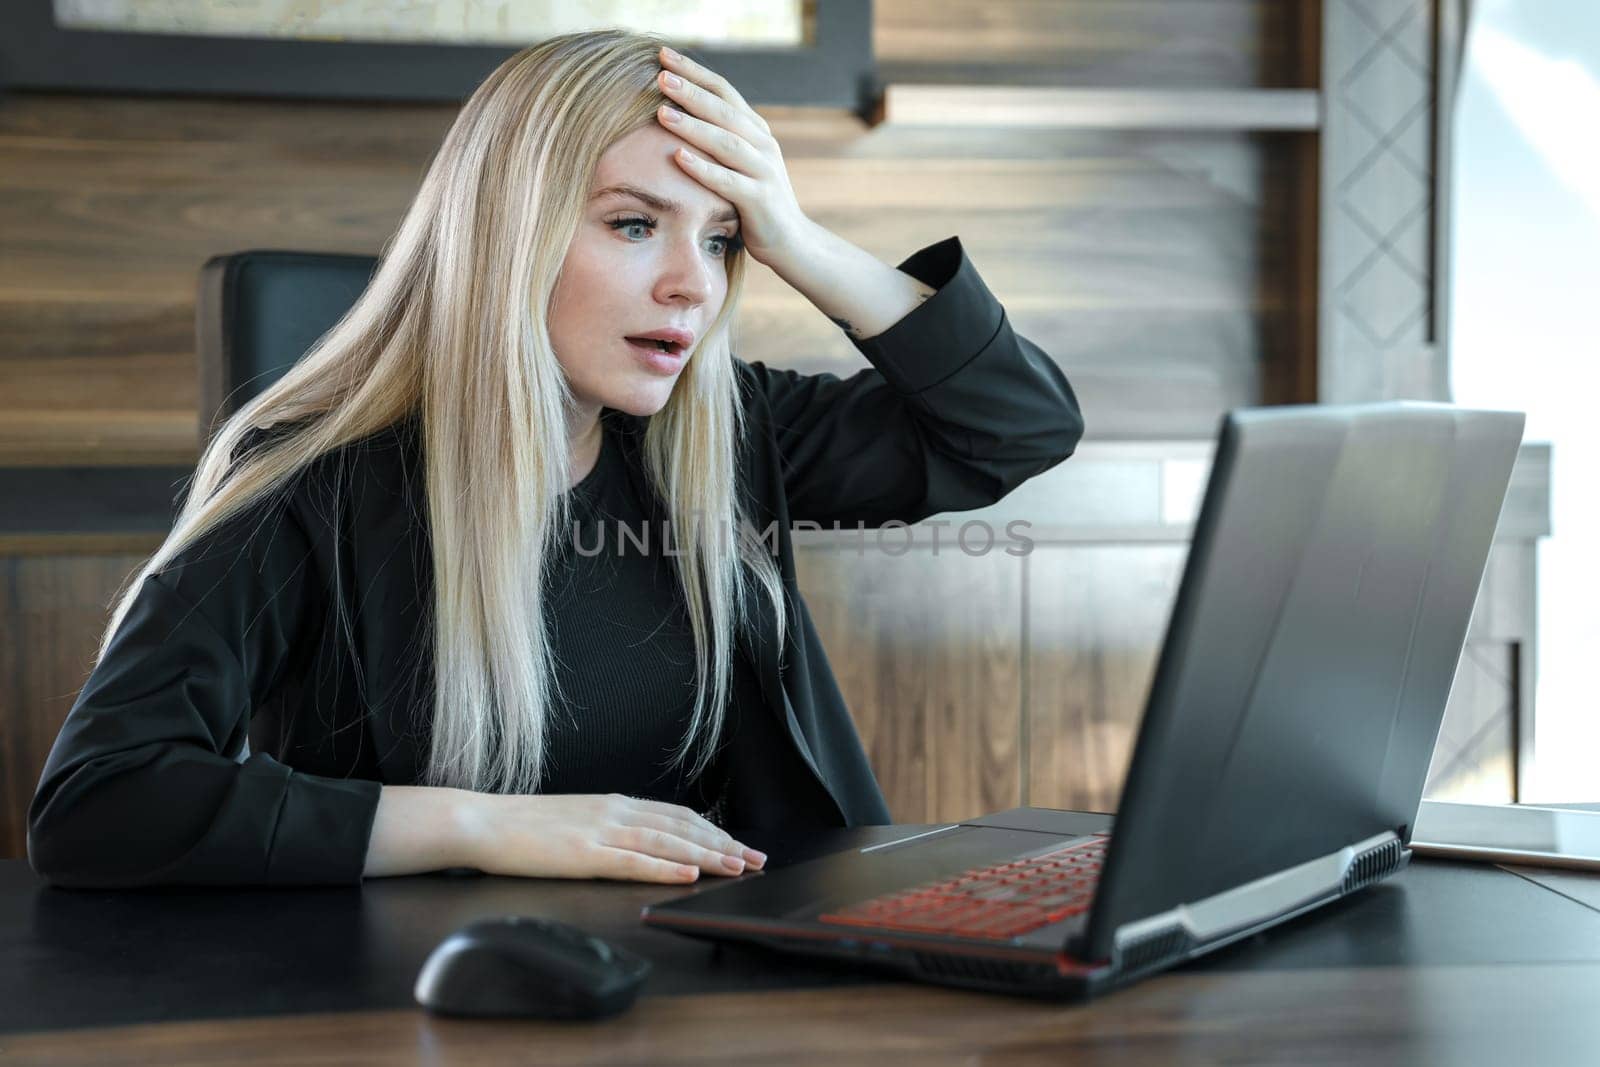 Woman with frightened expression looks at laptop screen, clutching forehead with her hand in surprise by Laguna781